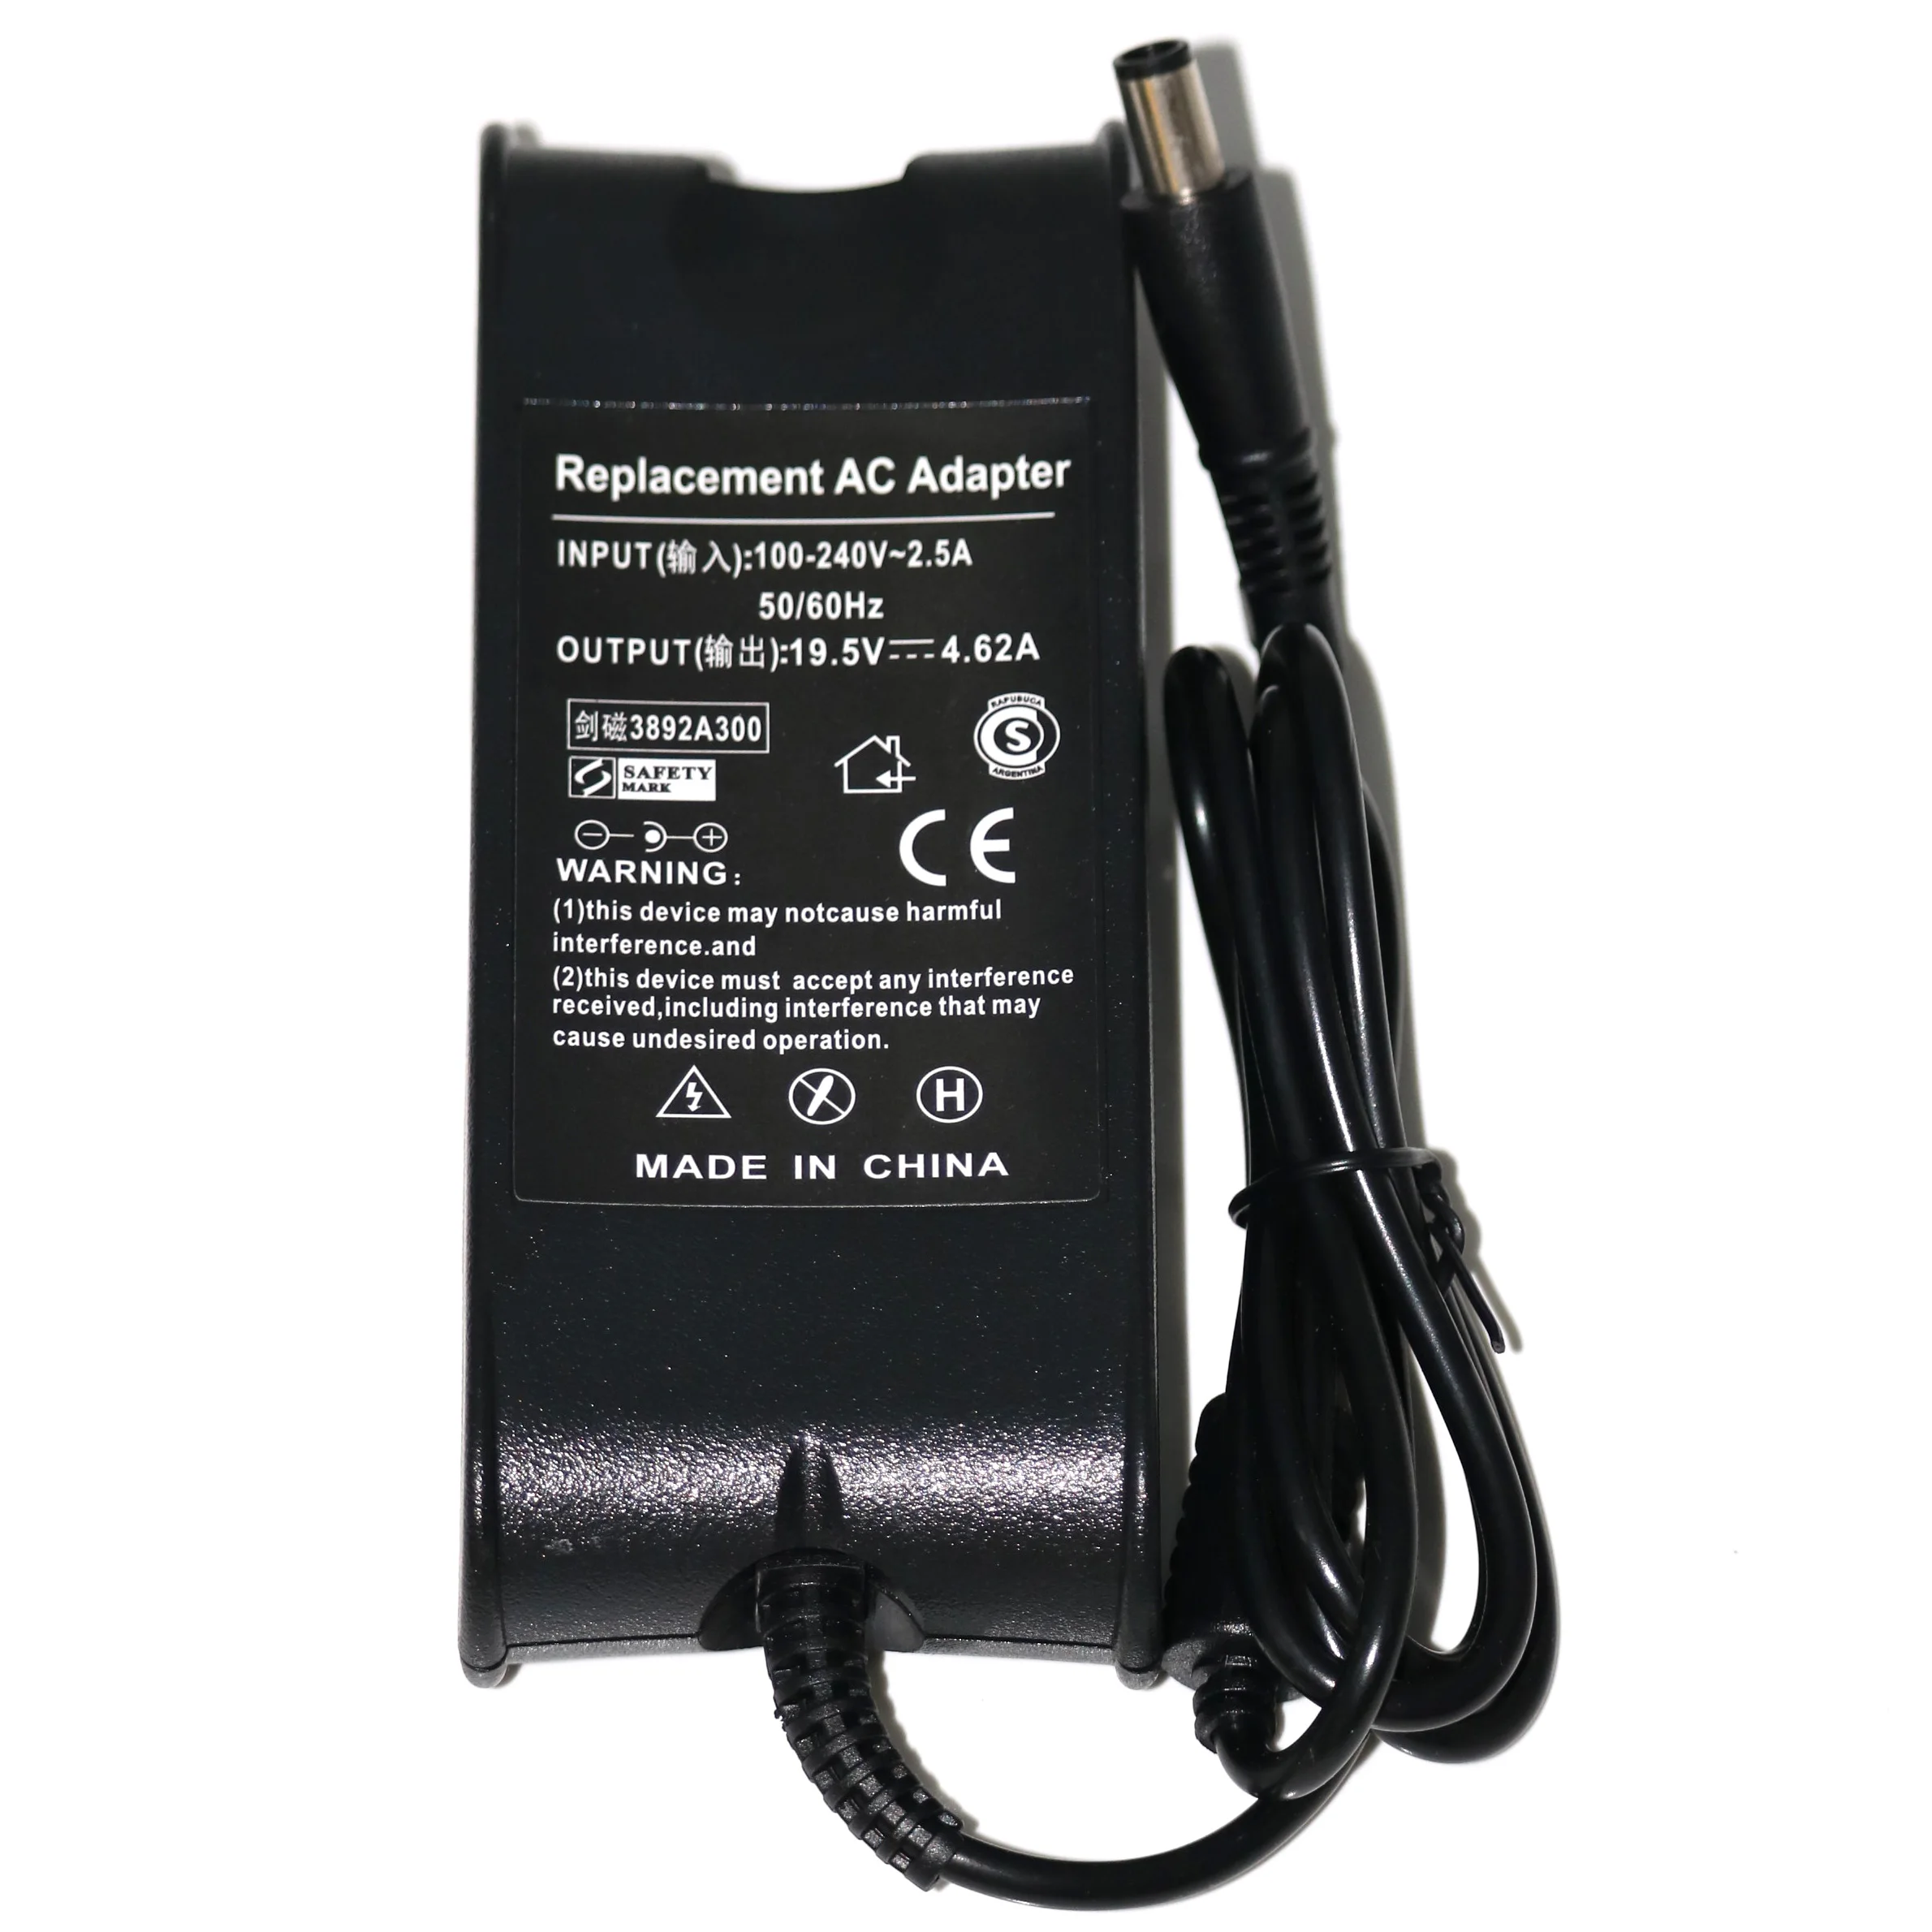 

90W Ac Adapter Charger for Dell Laptop Inspiron N7110 N5110 N7010 N4110 1545 5720 3520 3521 3542 5521 5537 9300 N5010 5580 N5050